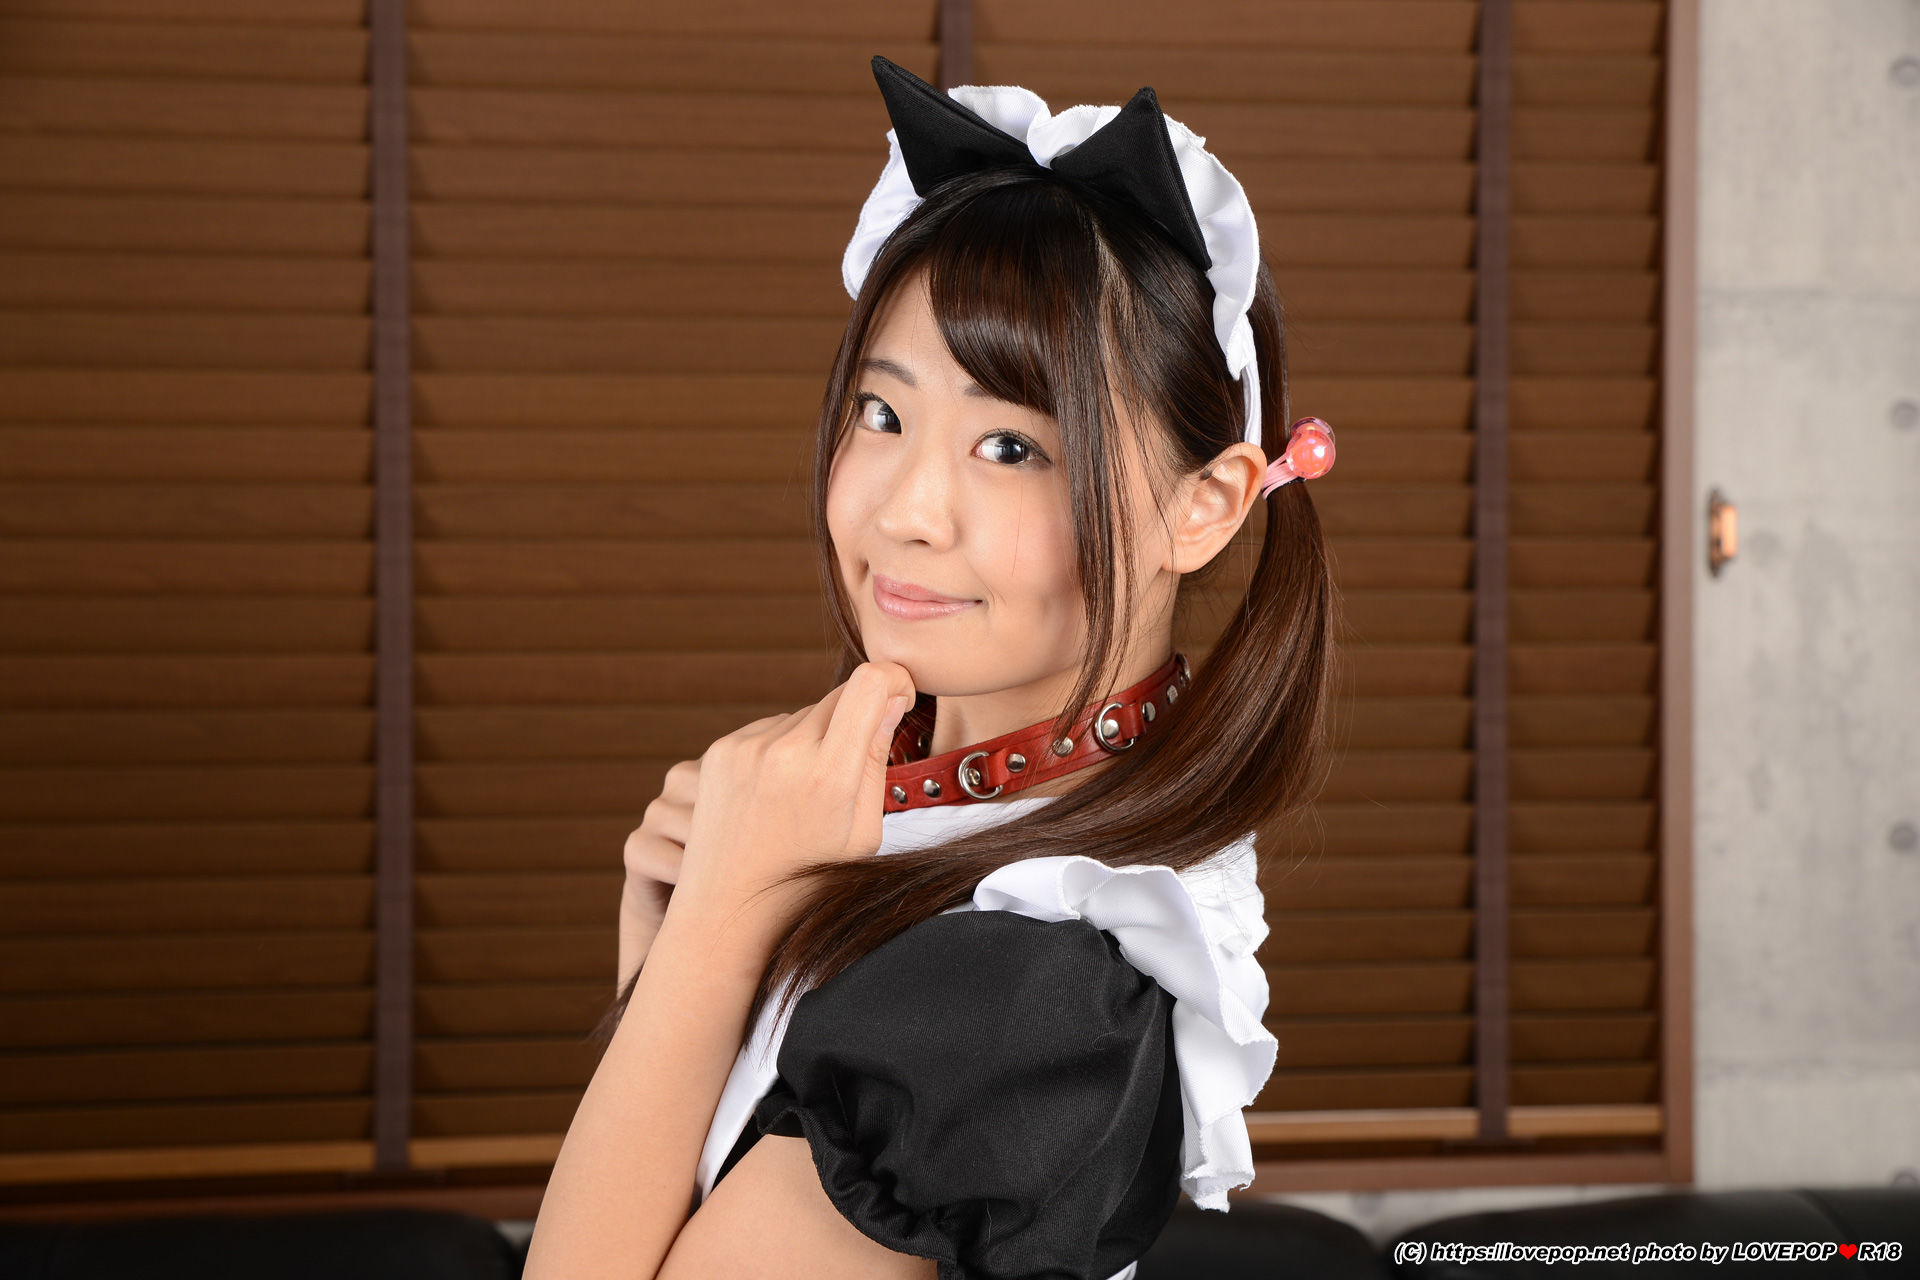 [LOVEPOP] Special Maid Collection - Airi Satou さとう愛理 Photoset 02